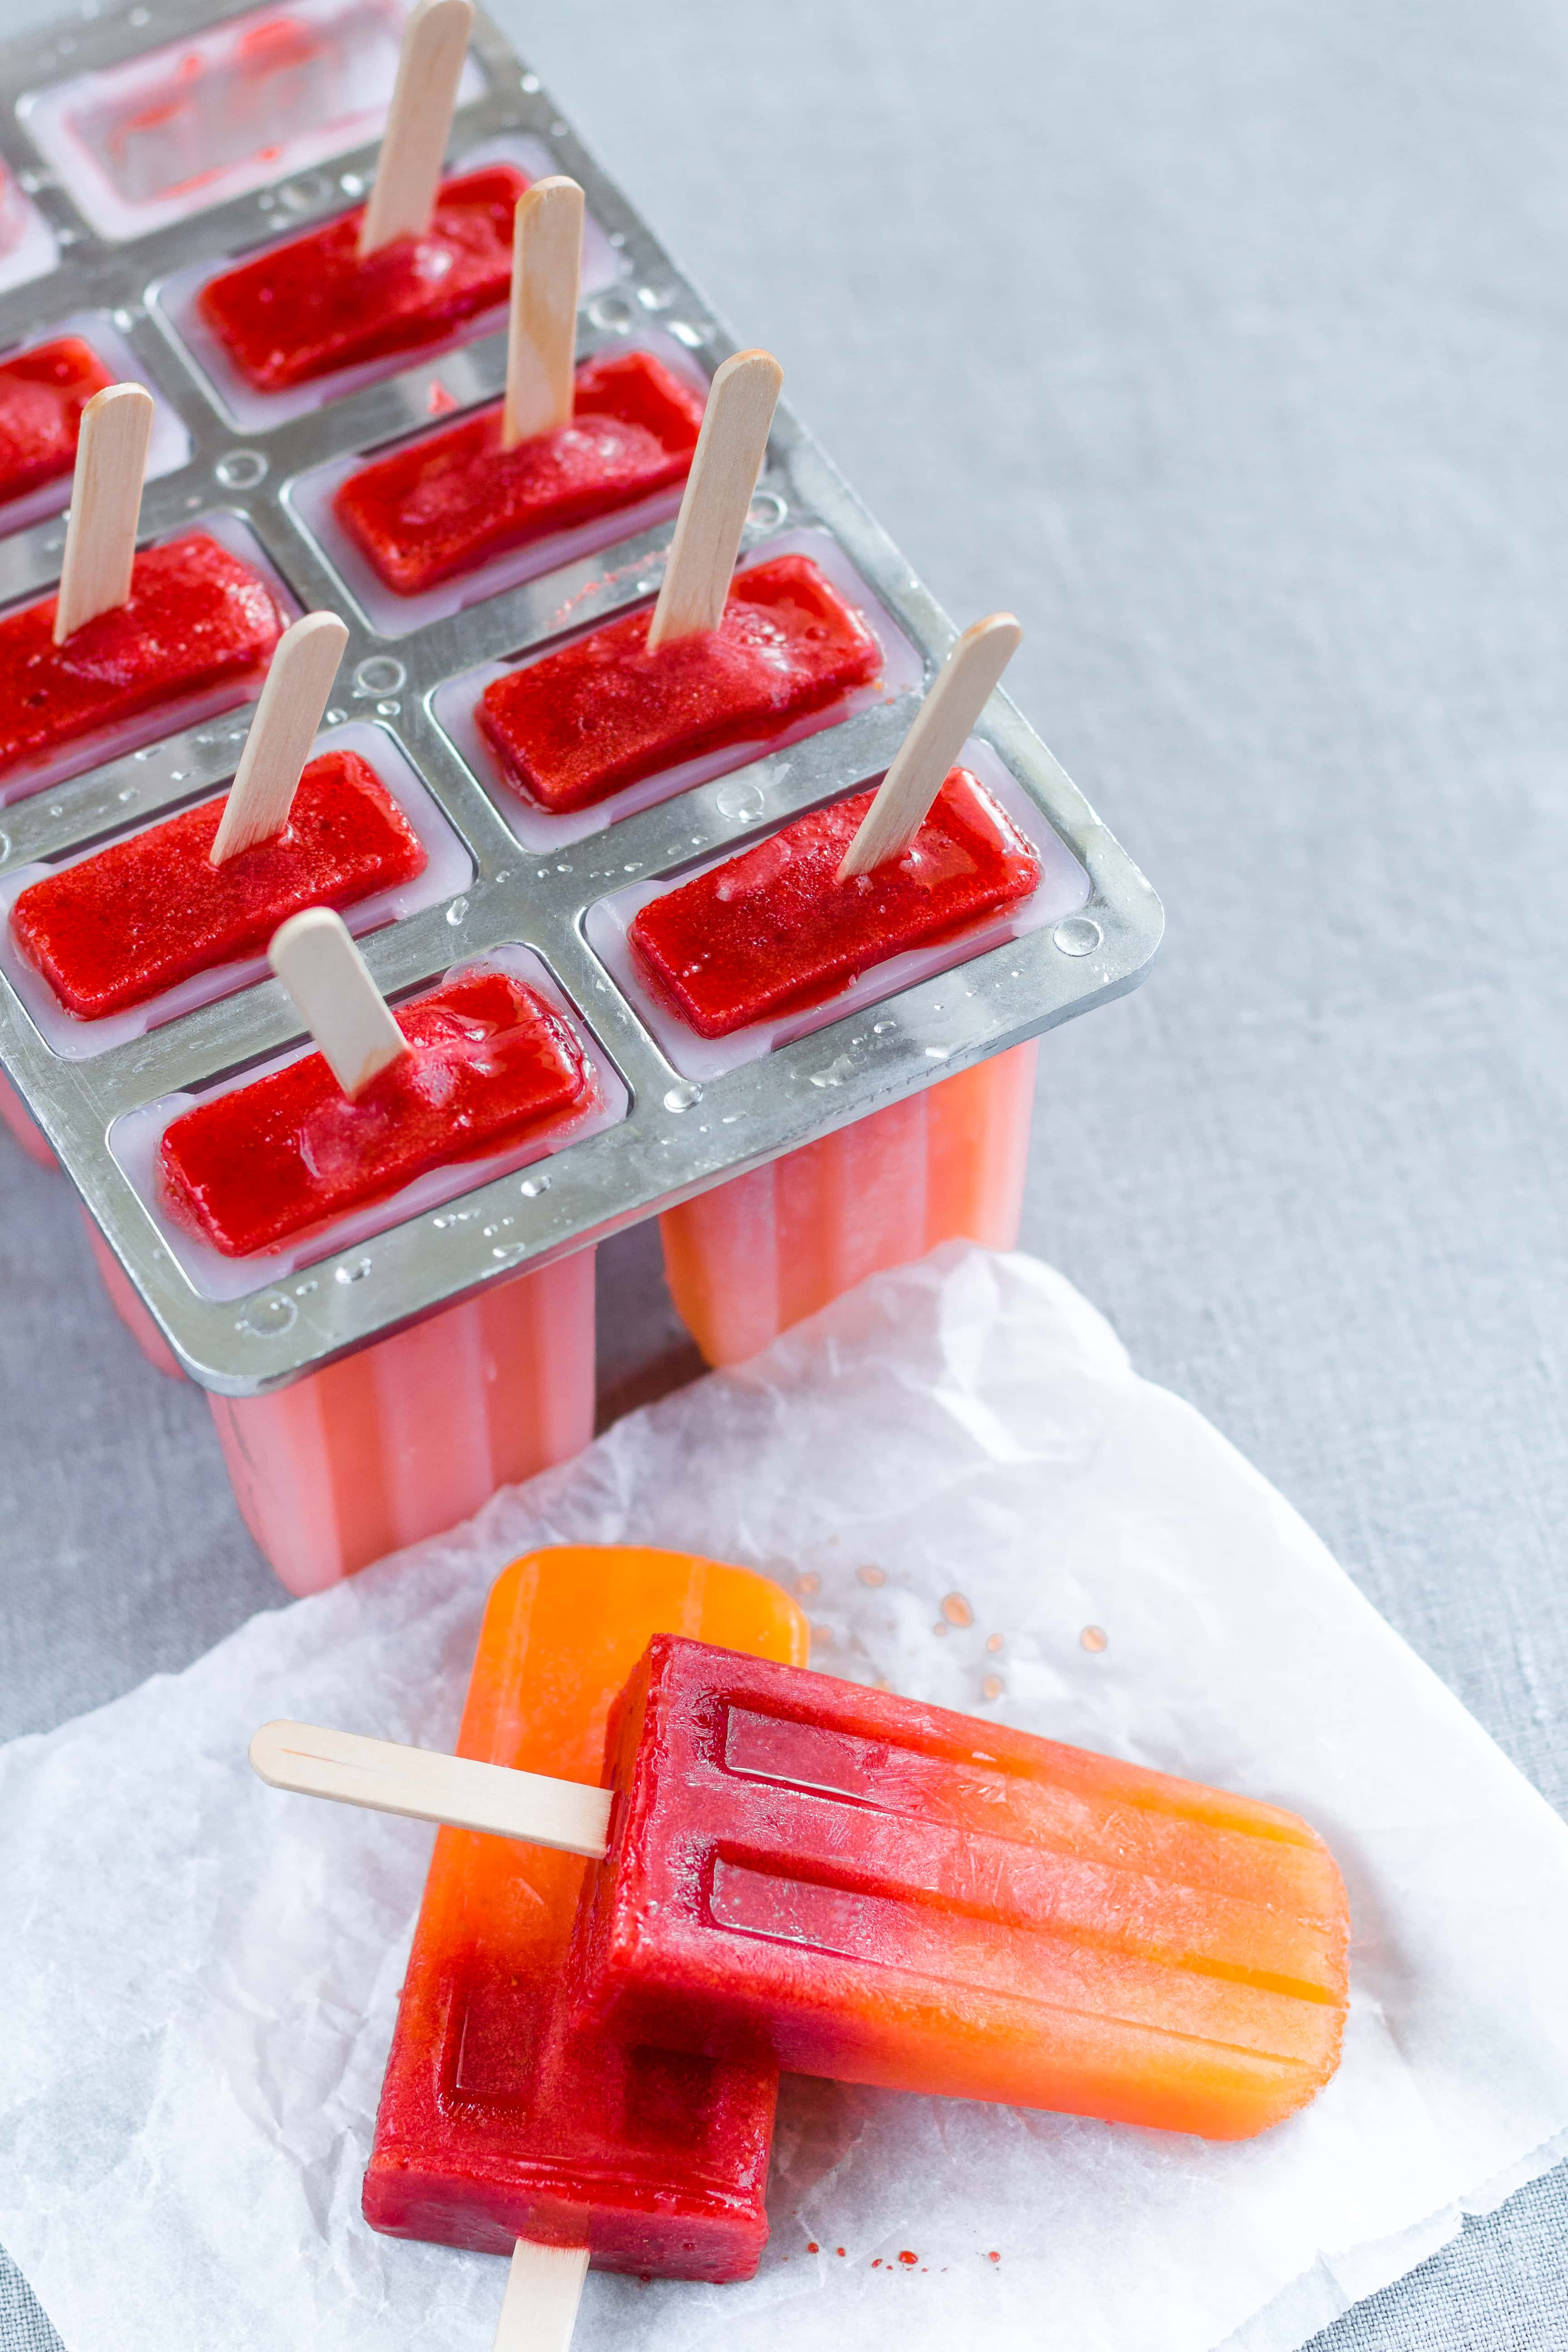 Orange Strawberry Popsicles in the popsicle molds with popsicle sticks sticking out of the ice cream. On a grey table cloth.